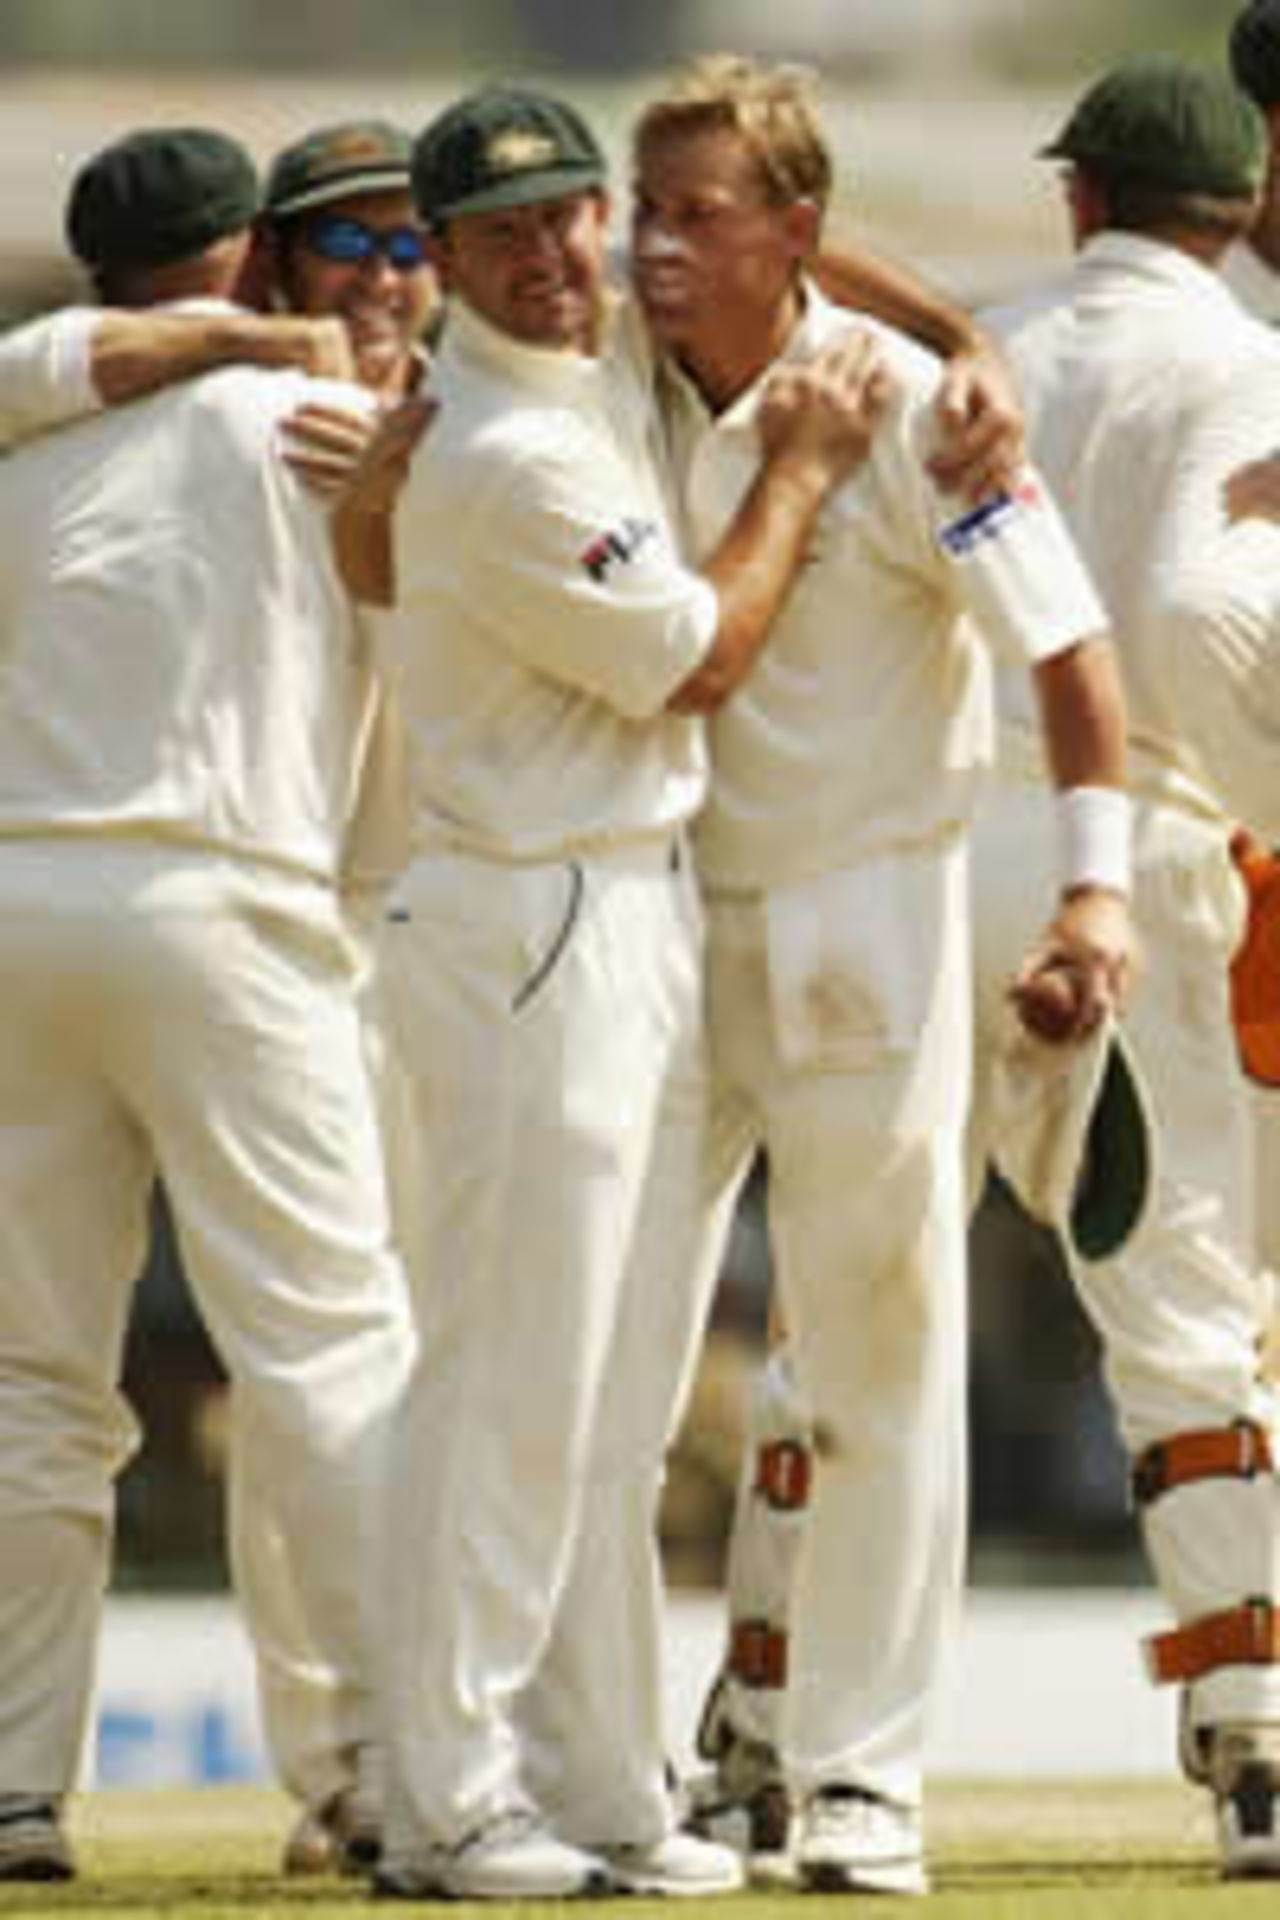 Ricky Ponting congratulates Shane Warne on an excellent bowling effort that helped Australia win its first series in Sri Lanka for many years